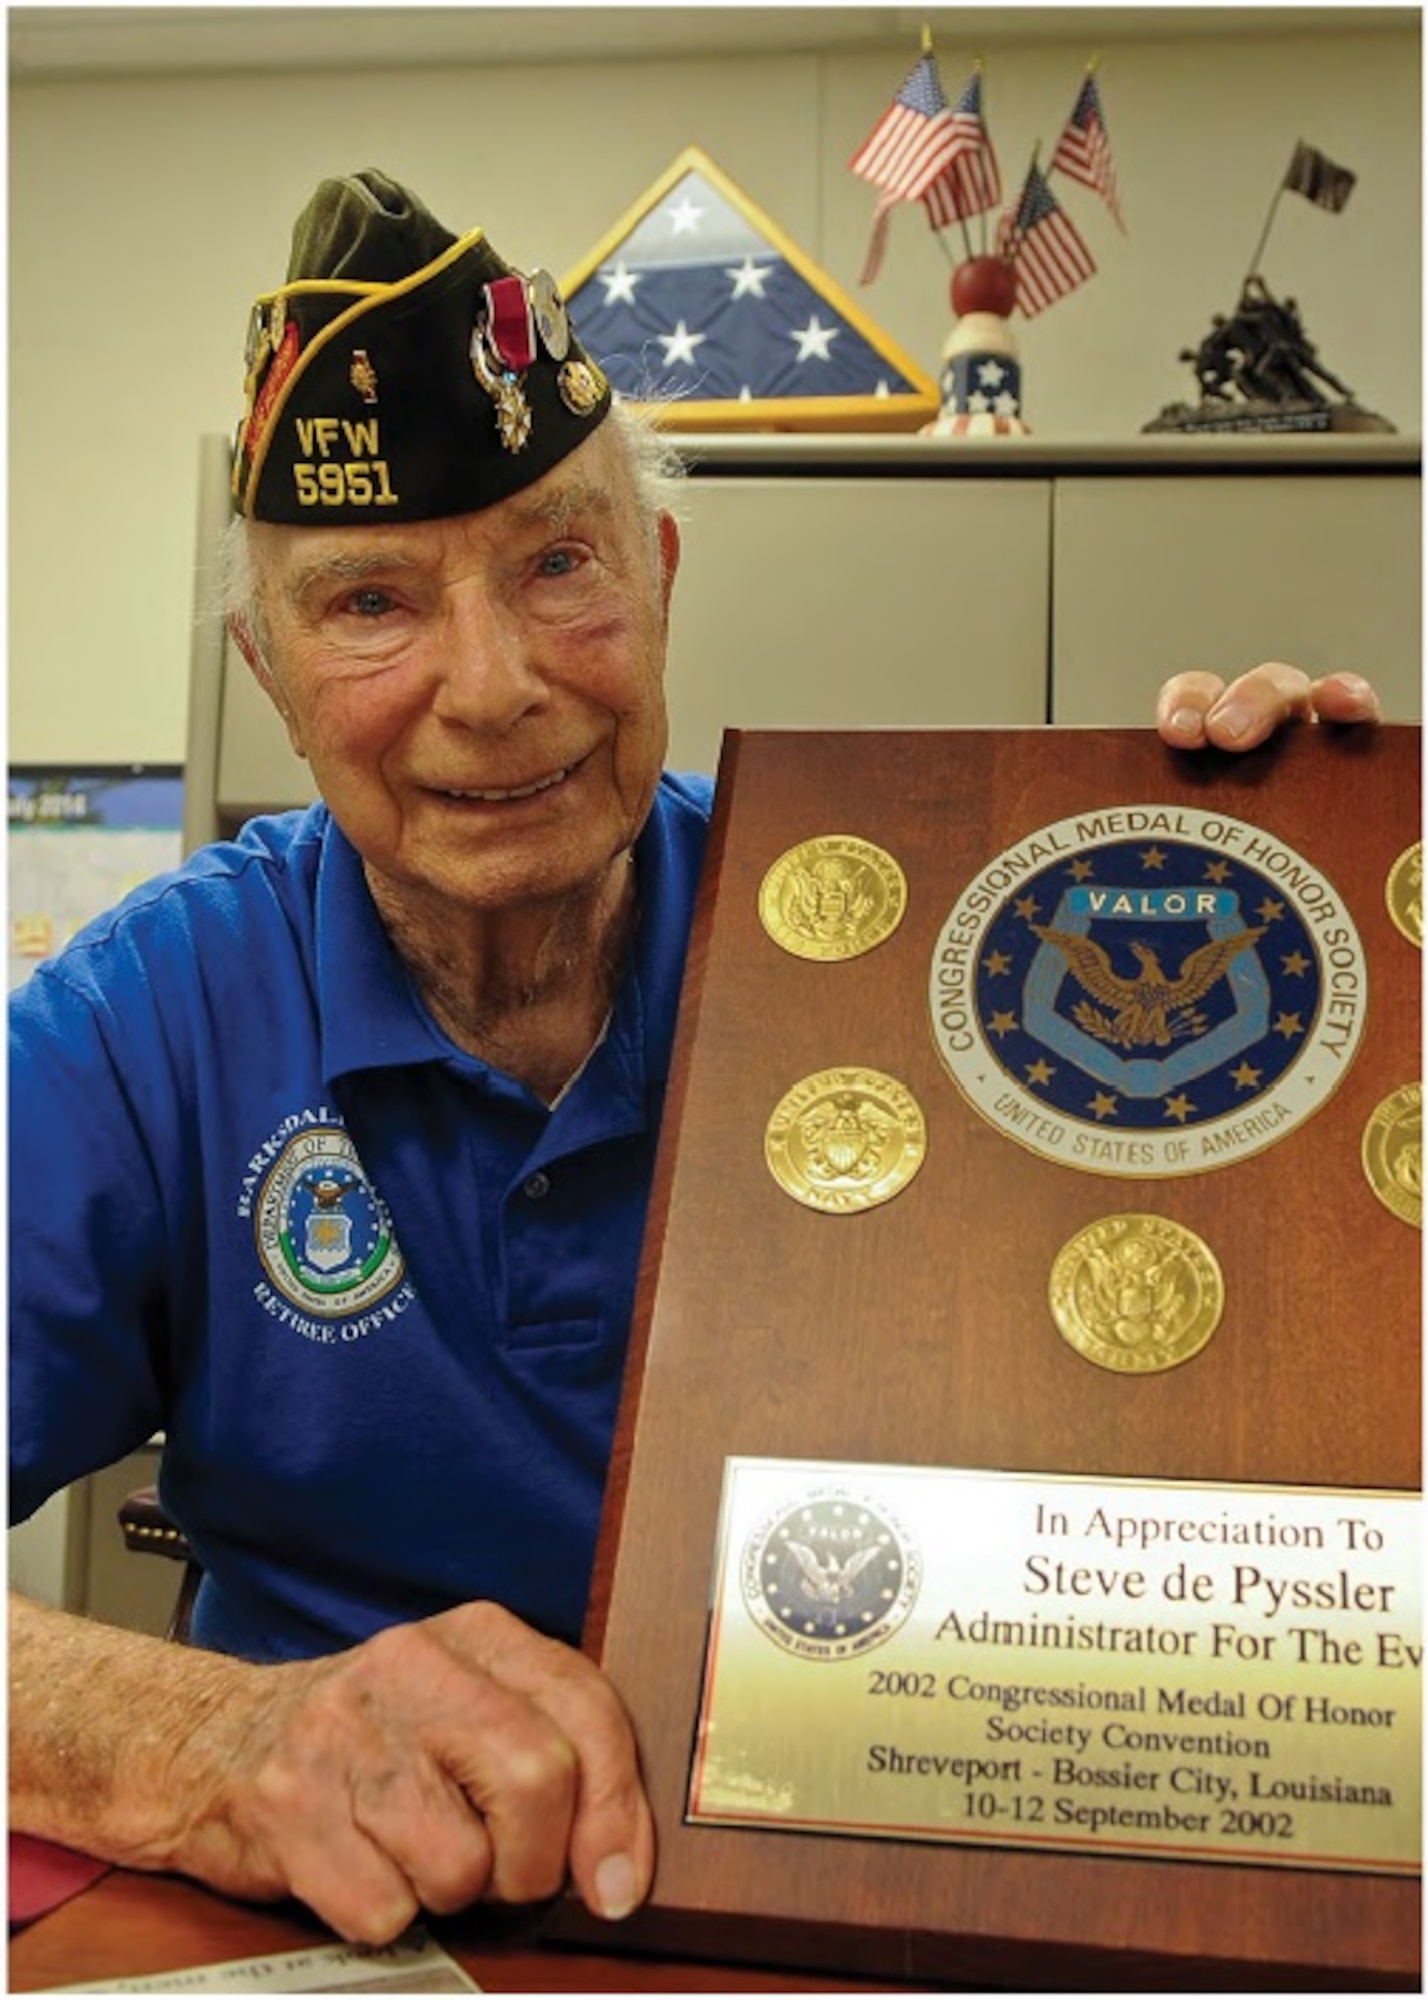 Colonel (Ret.) Steve dePyssler is a 38-year Army Air Corps and Air Force veteran. Born in 1919, he was drafted into the Army Air Corps in 1940 as World War II began. While on active duty, he served as every enlisted, warrant officer and officer grade up to O-6. (U.S. Air Force photo by Senior Airman Kristin High)